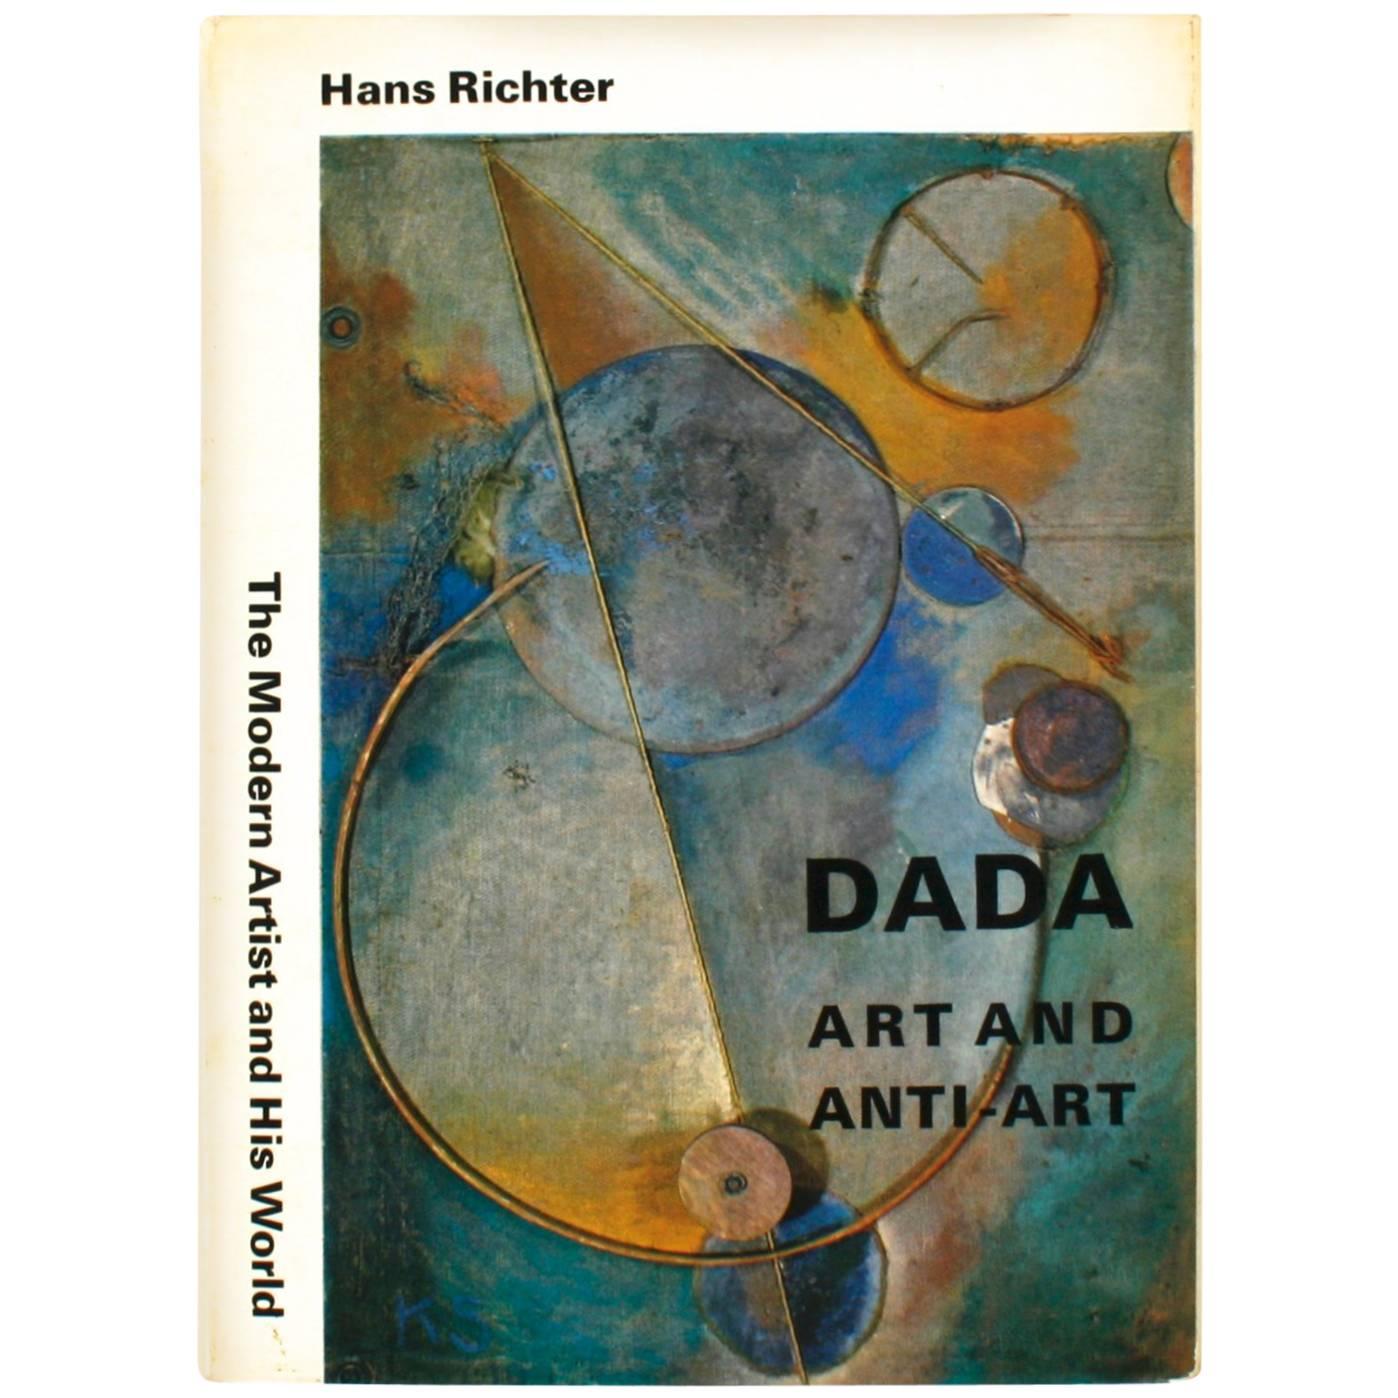 Dada, Art and Anti-Art by Hans Richter, 1st Edition